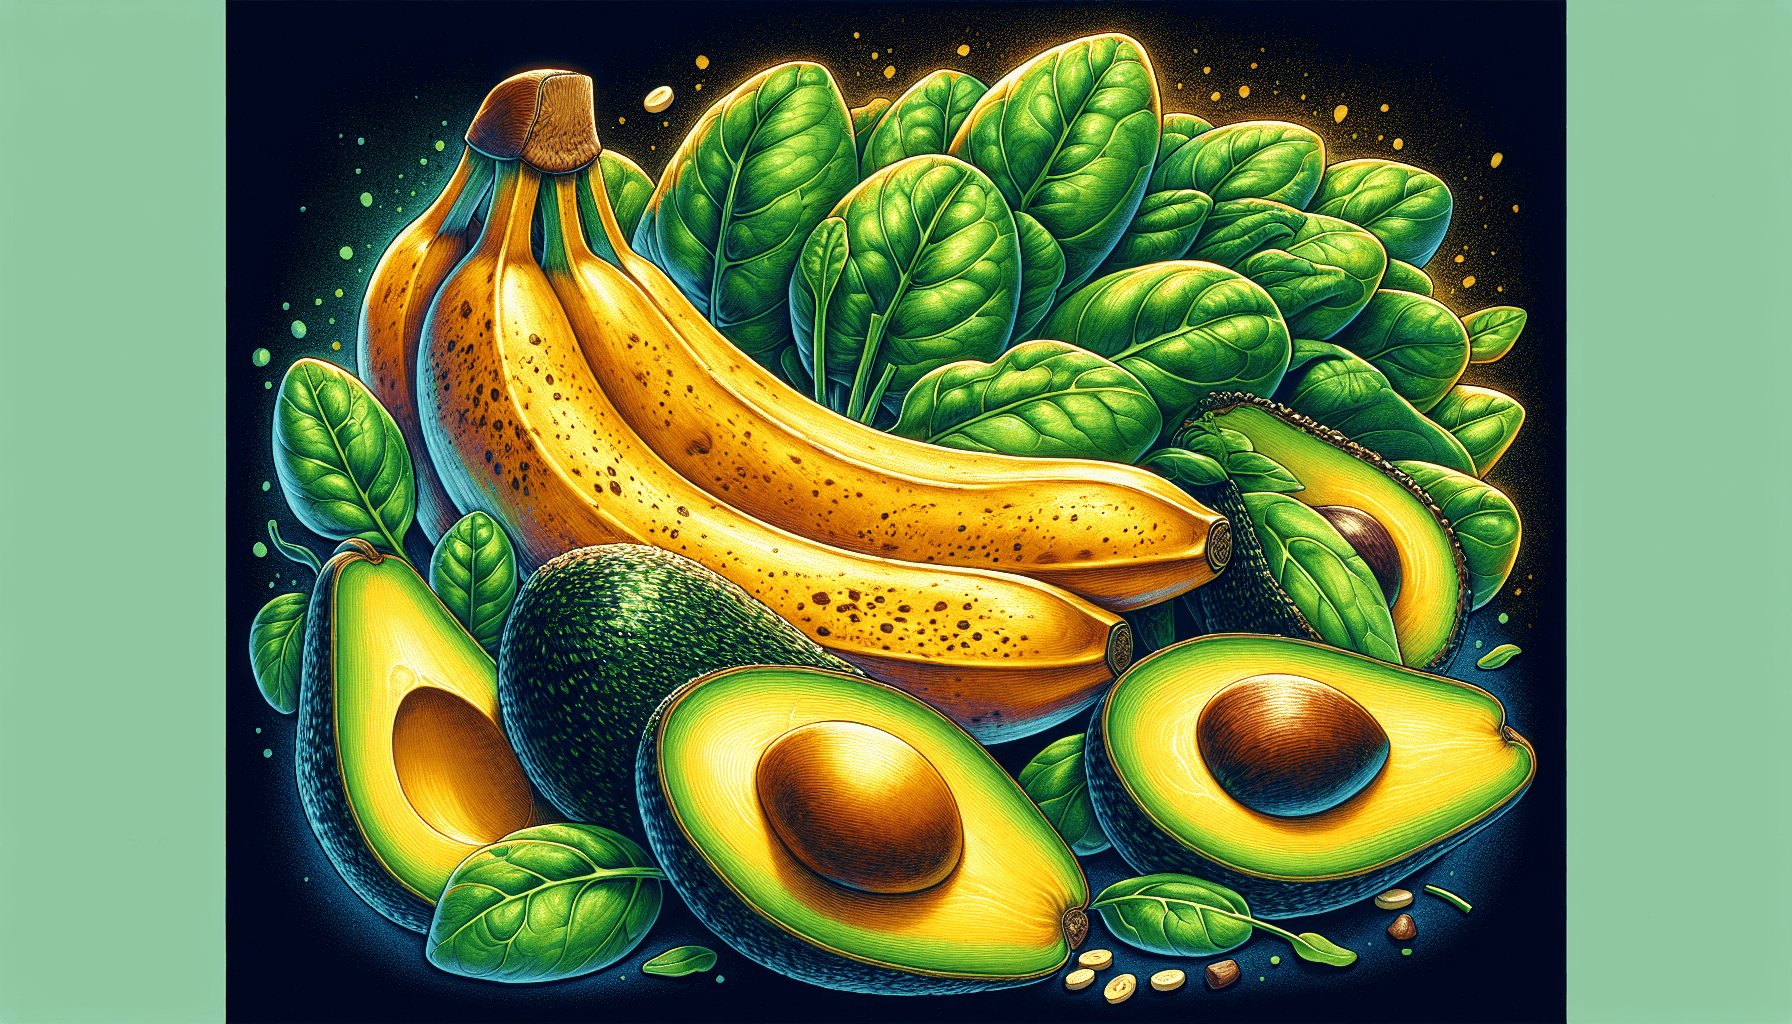 Illustration of potassium-rich foods for heart health